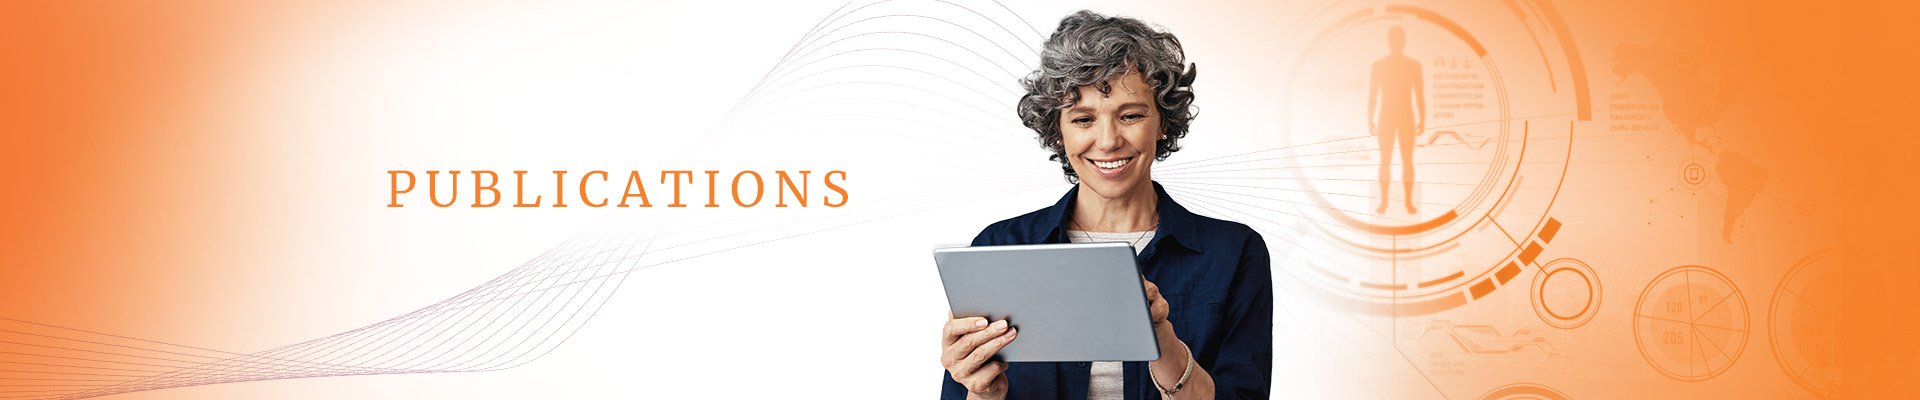 smiling woman looking at tablet on orange background